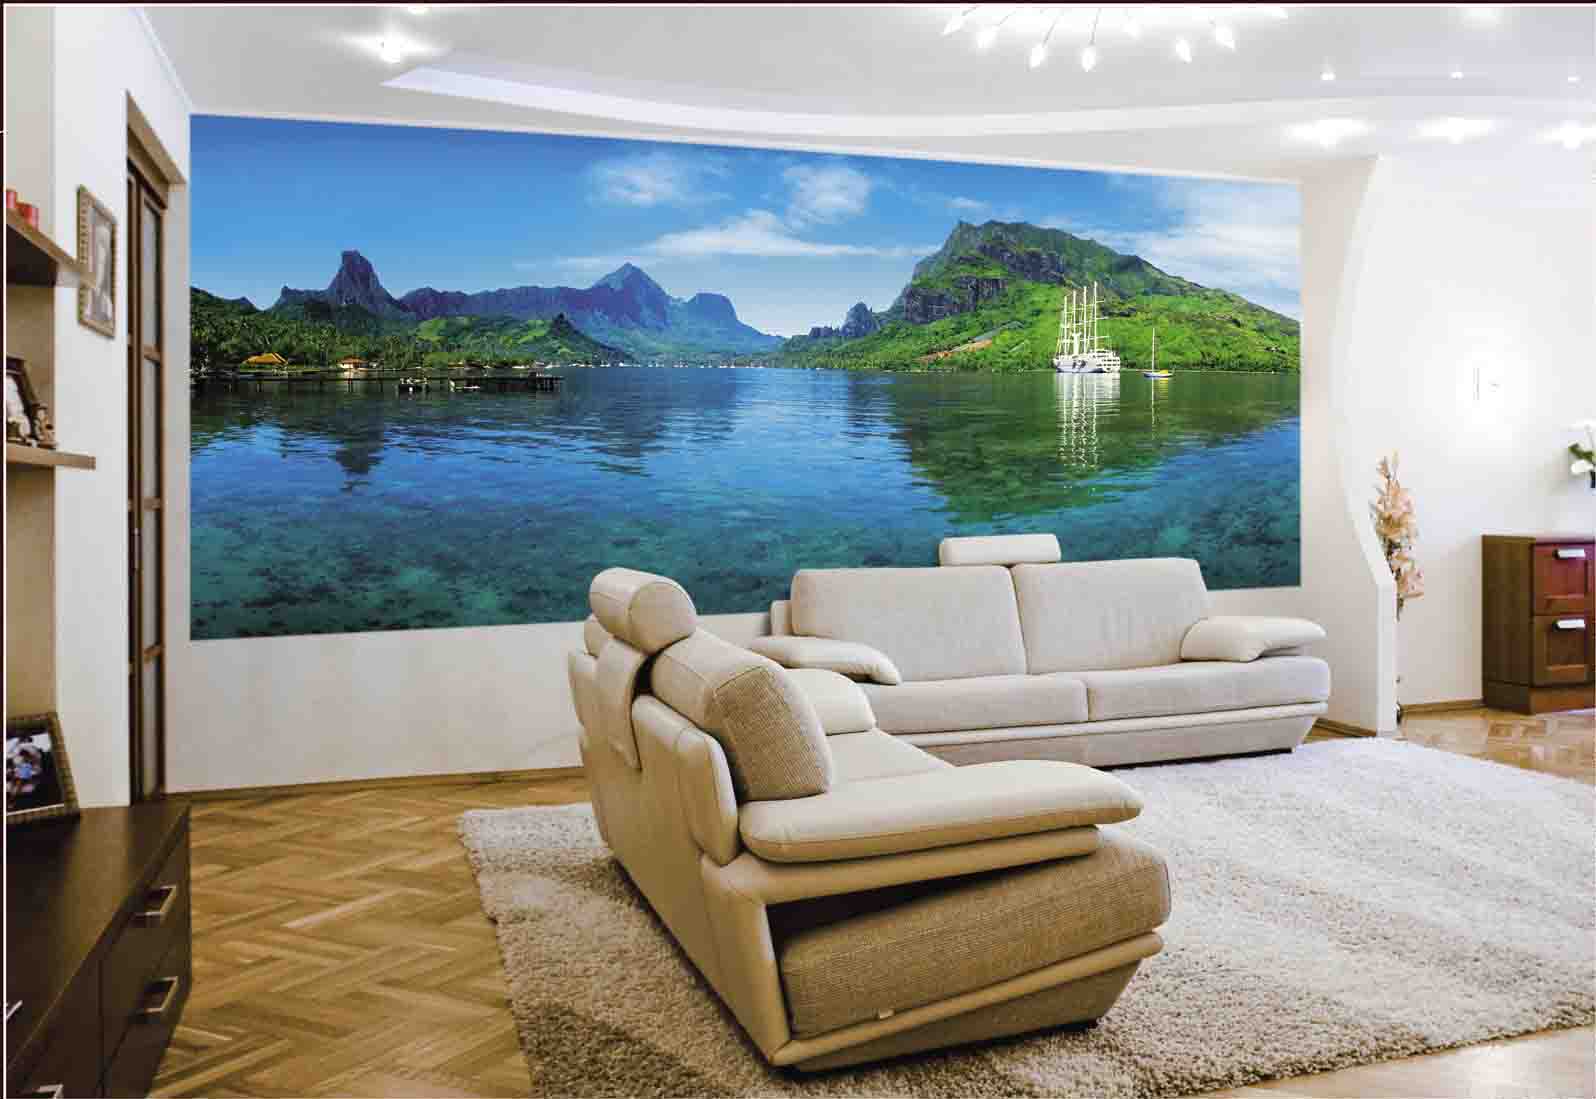 Most Widespread Types of Wallpaper. Photo wallpaper for accent walls